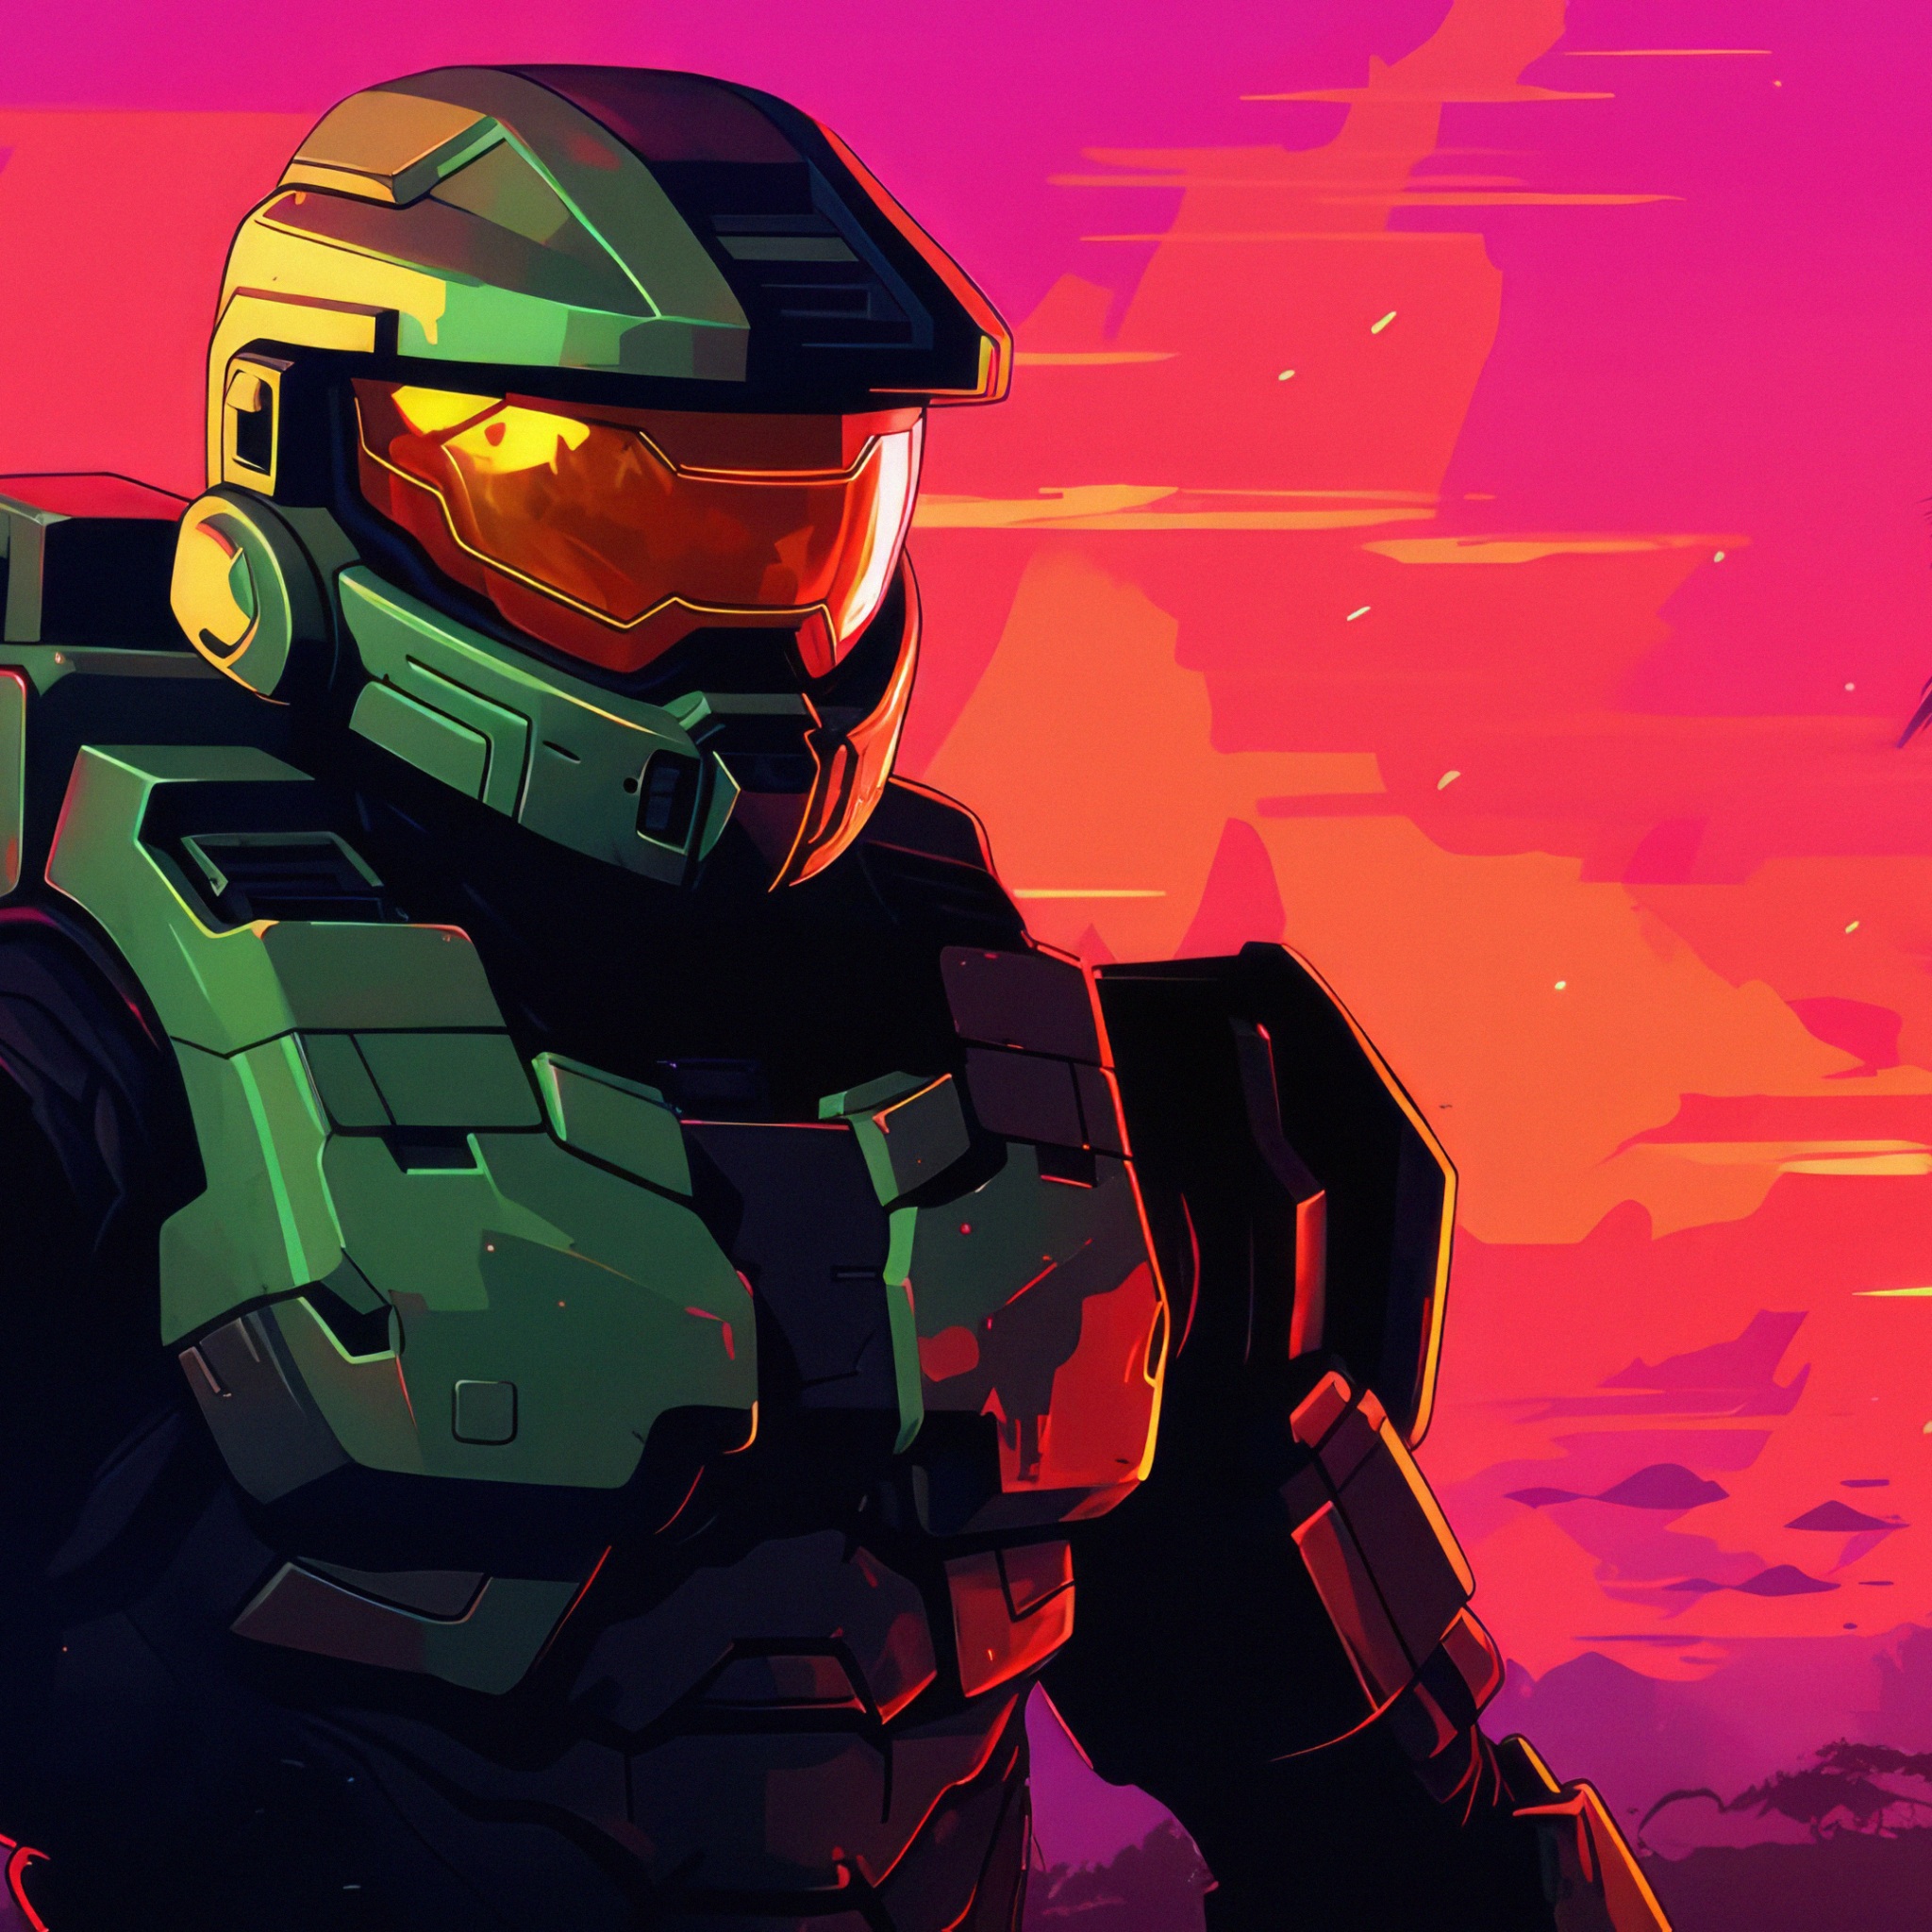 Hotline Miami Master Chief From Halo 2023 - 4k Wallpapers - 40.000 ...